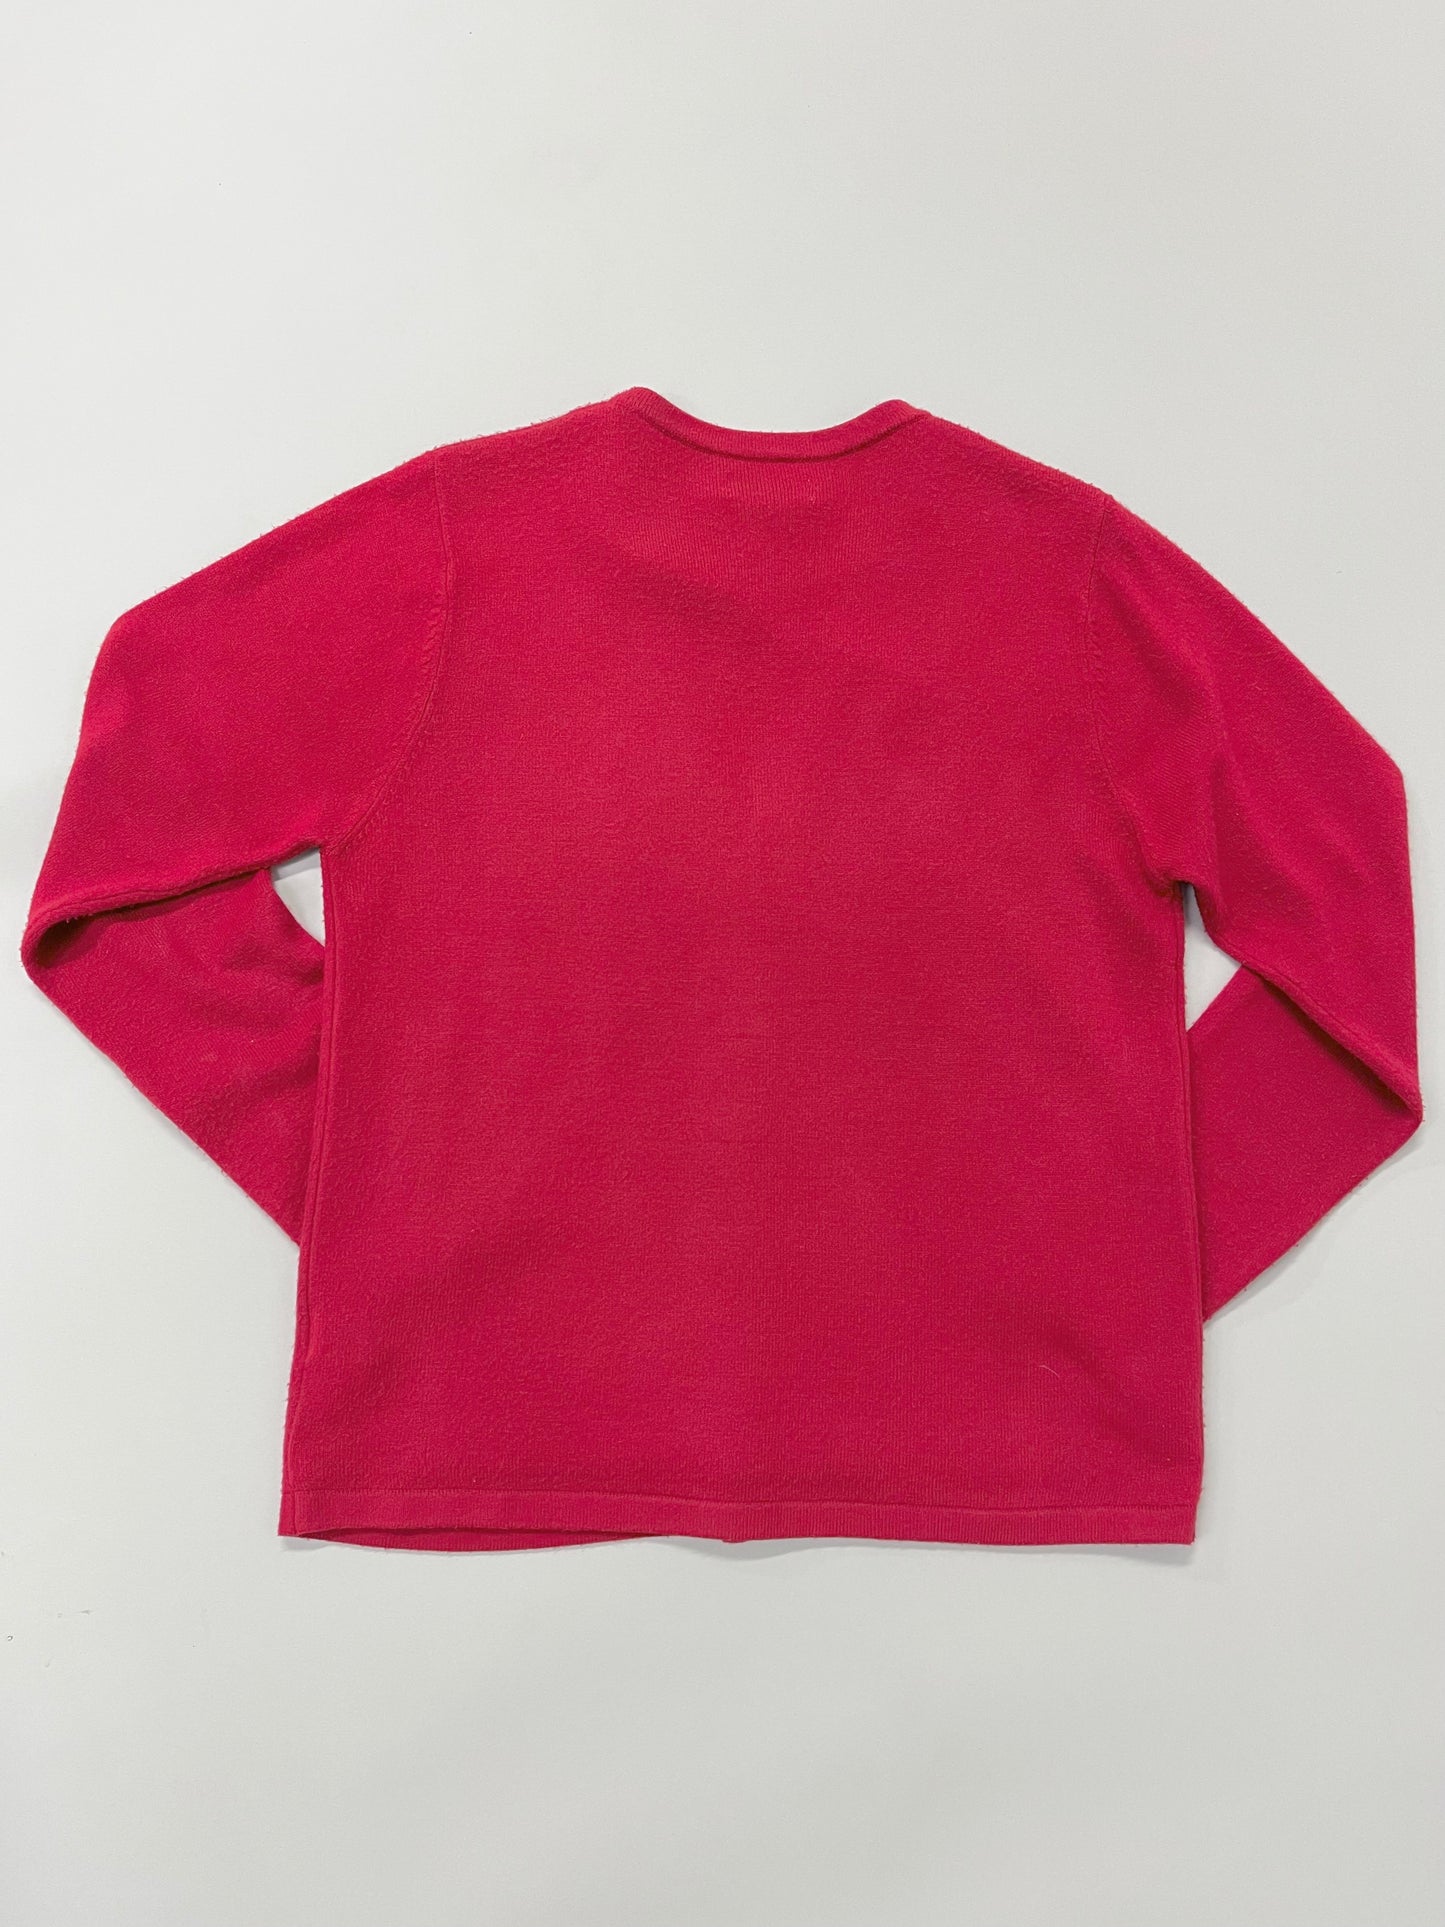 Red Cardigan Sweater - Small